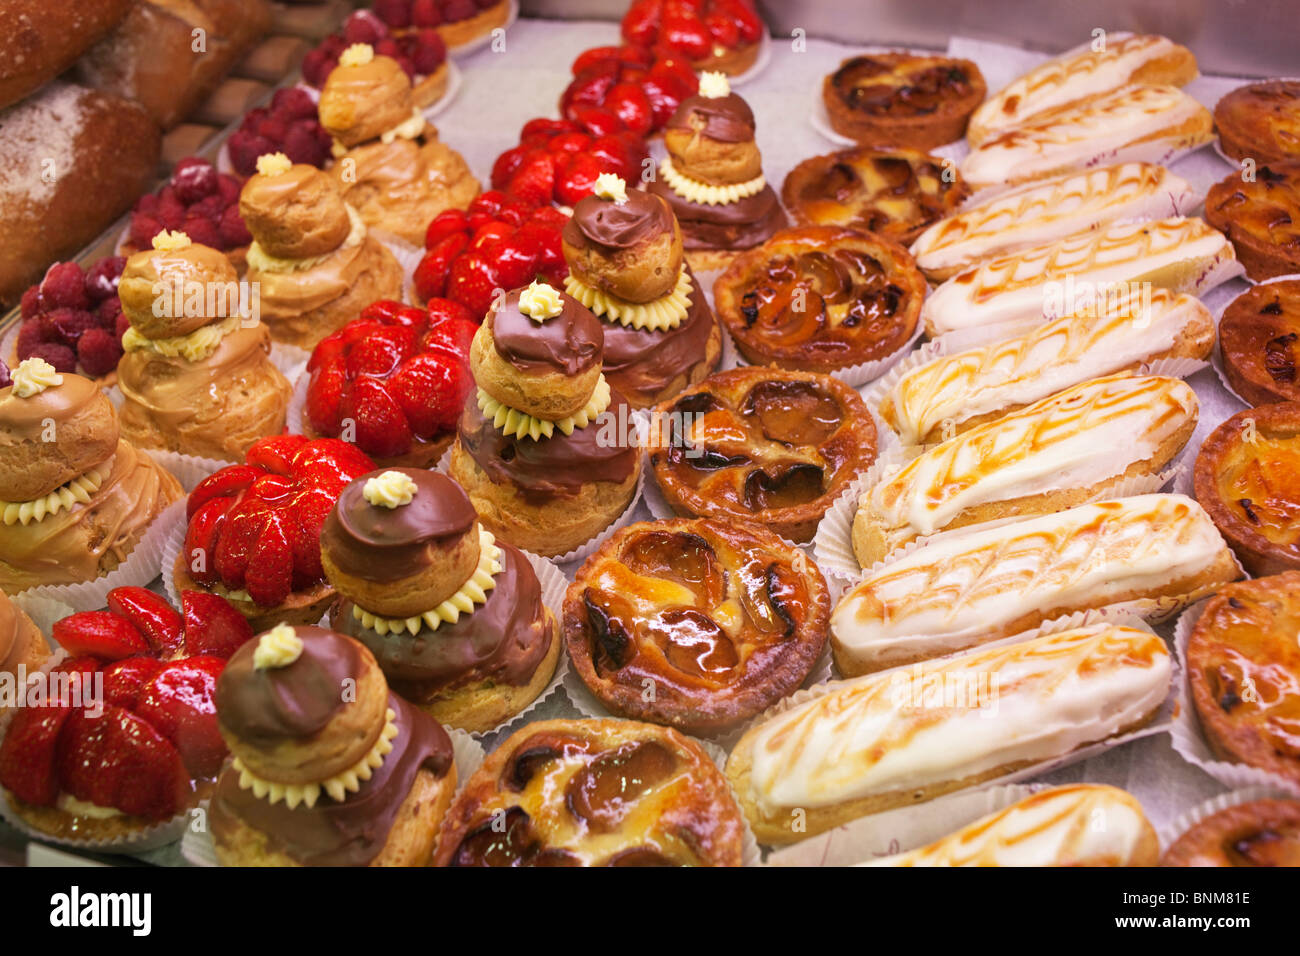 Europe France Paris French Desserts Desserts Cake Cakes French Cakes French Pastries Pastries Pastry French Food Food Parisian Stock Photo